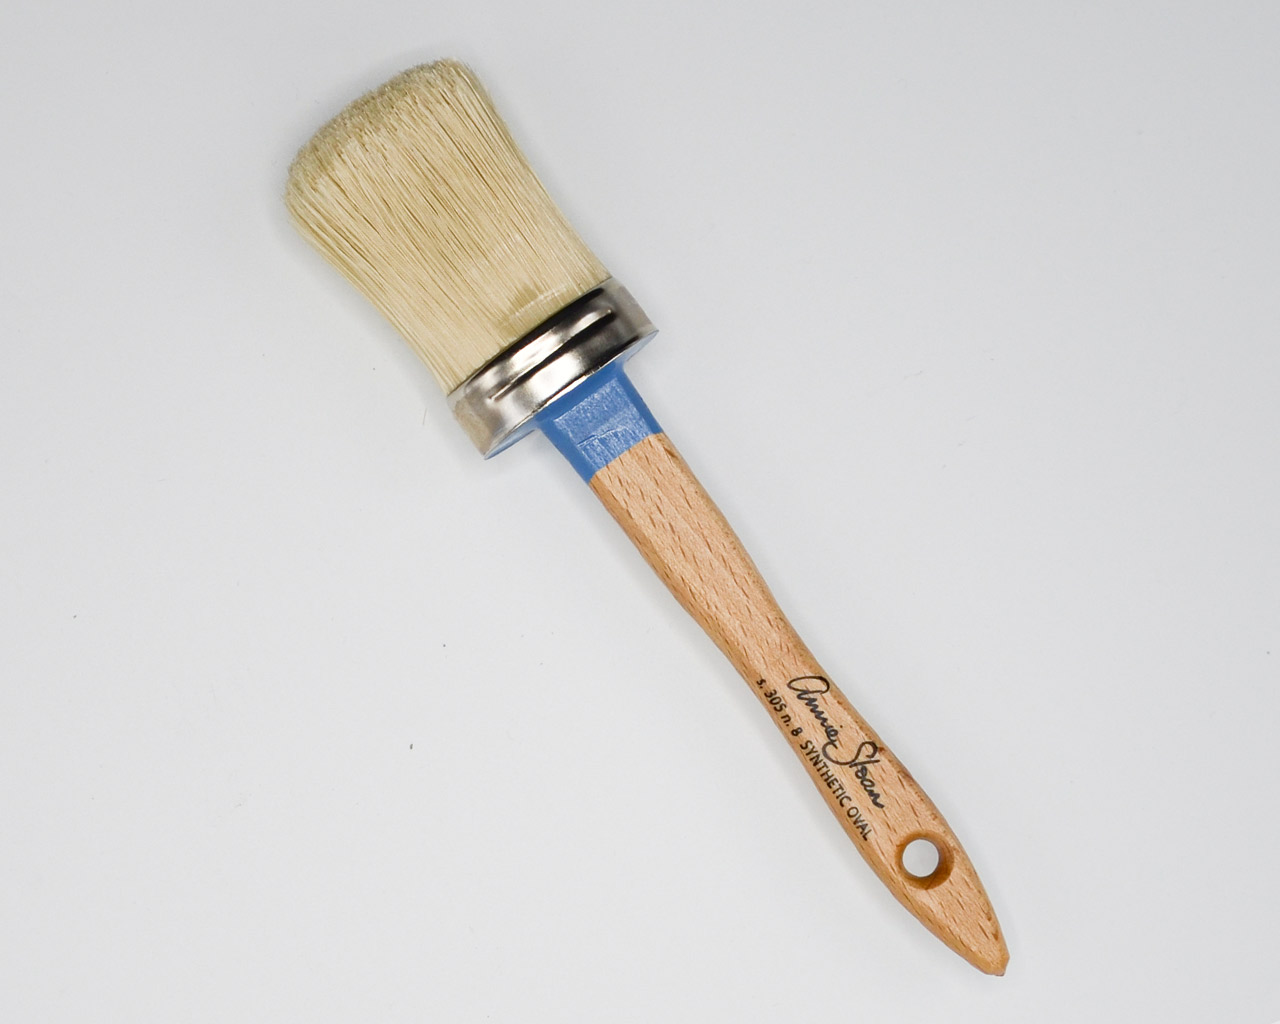 Annie Sloan Vegan Chalk Paint Brush in Small Product Image